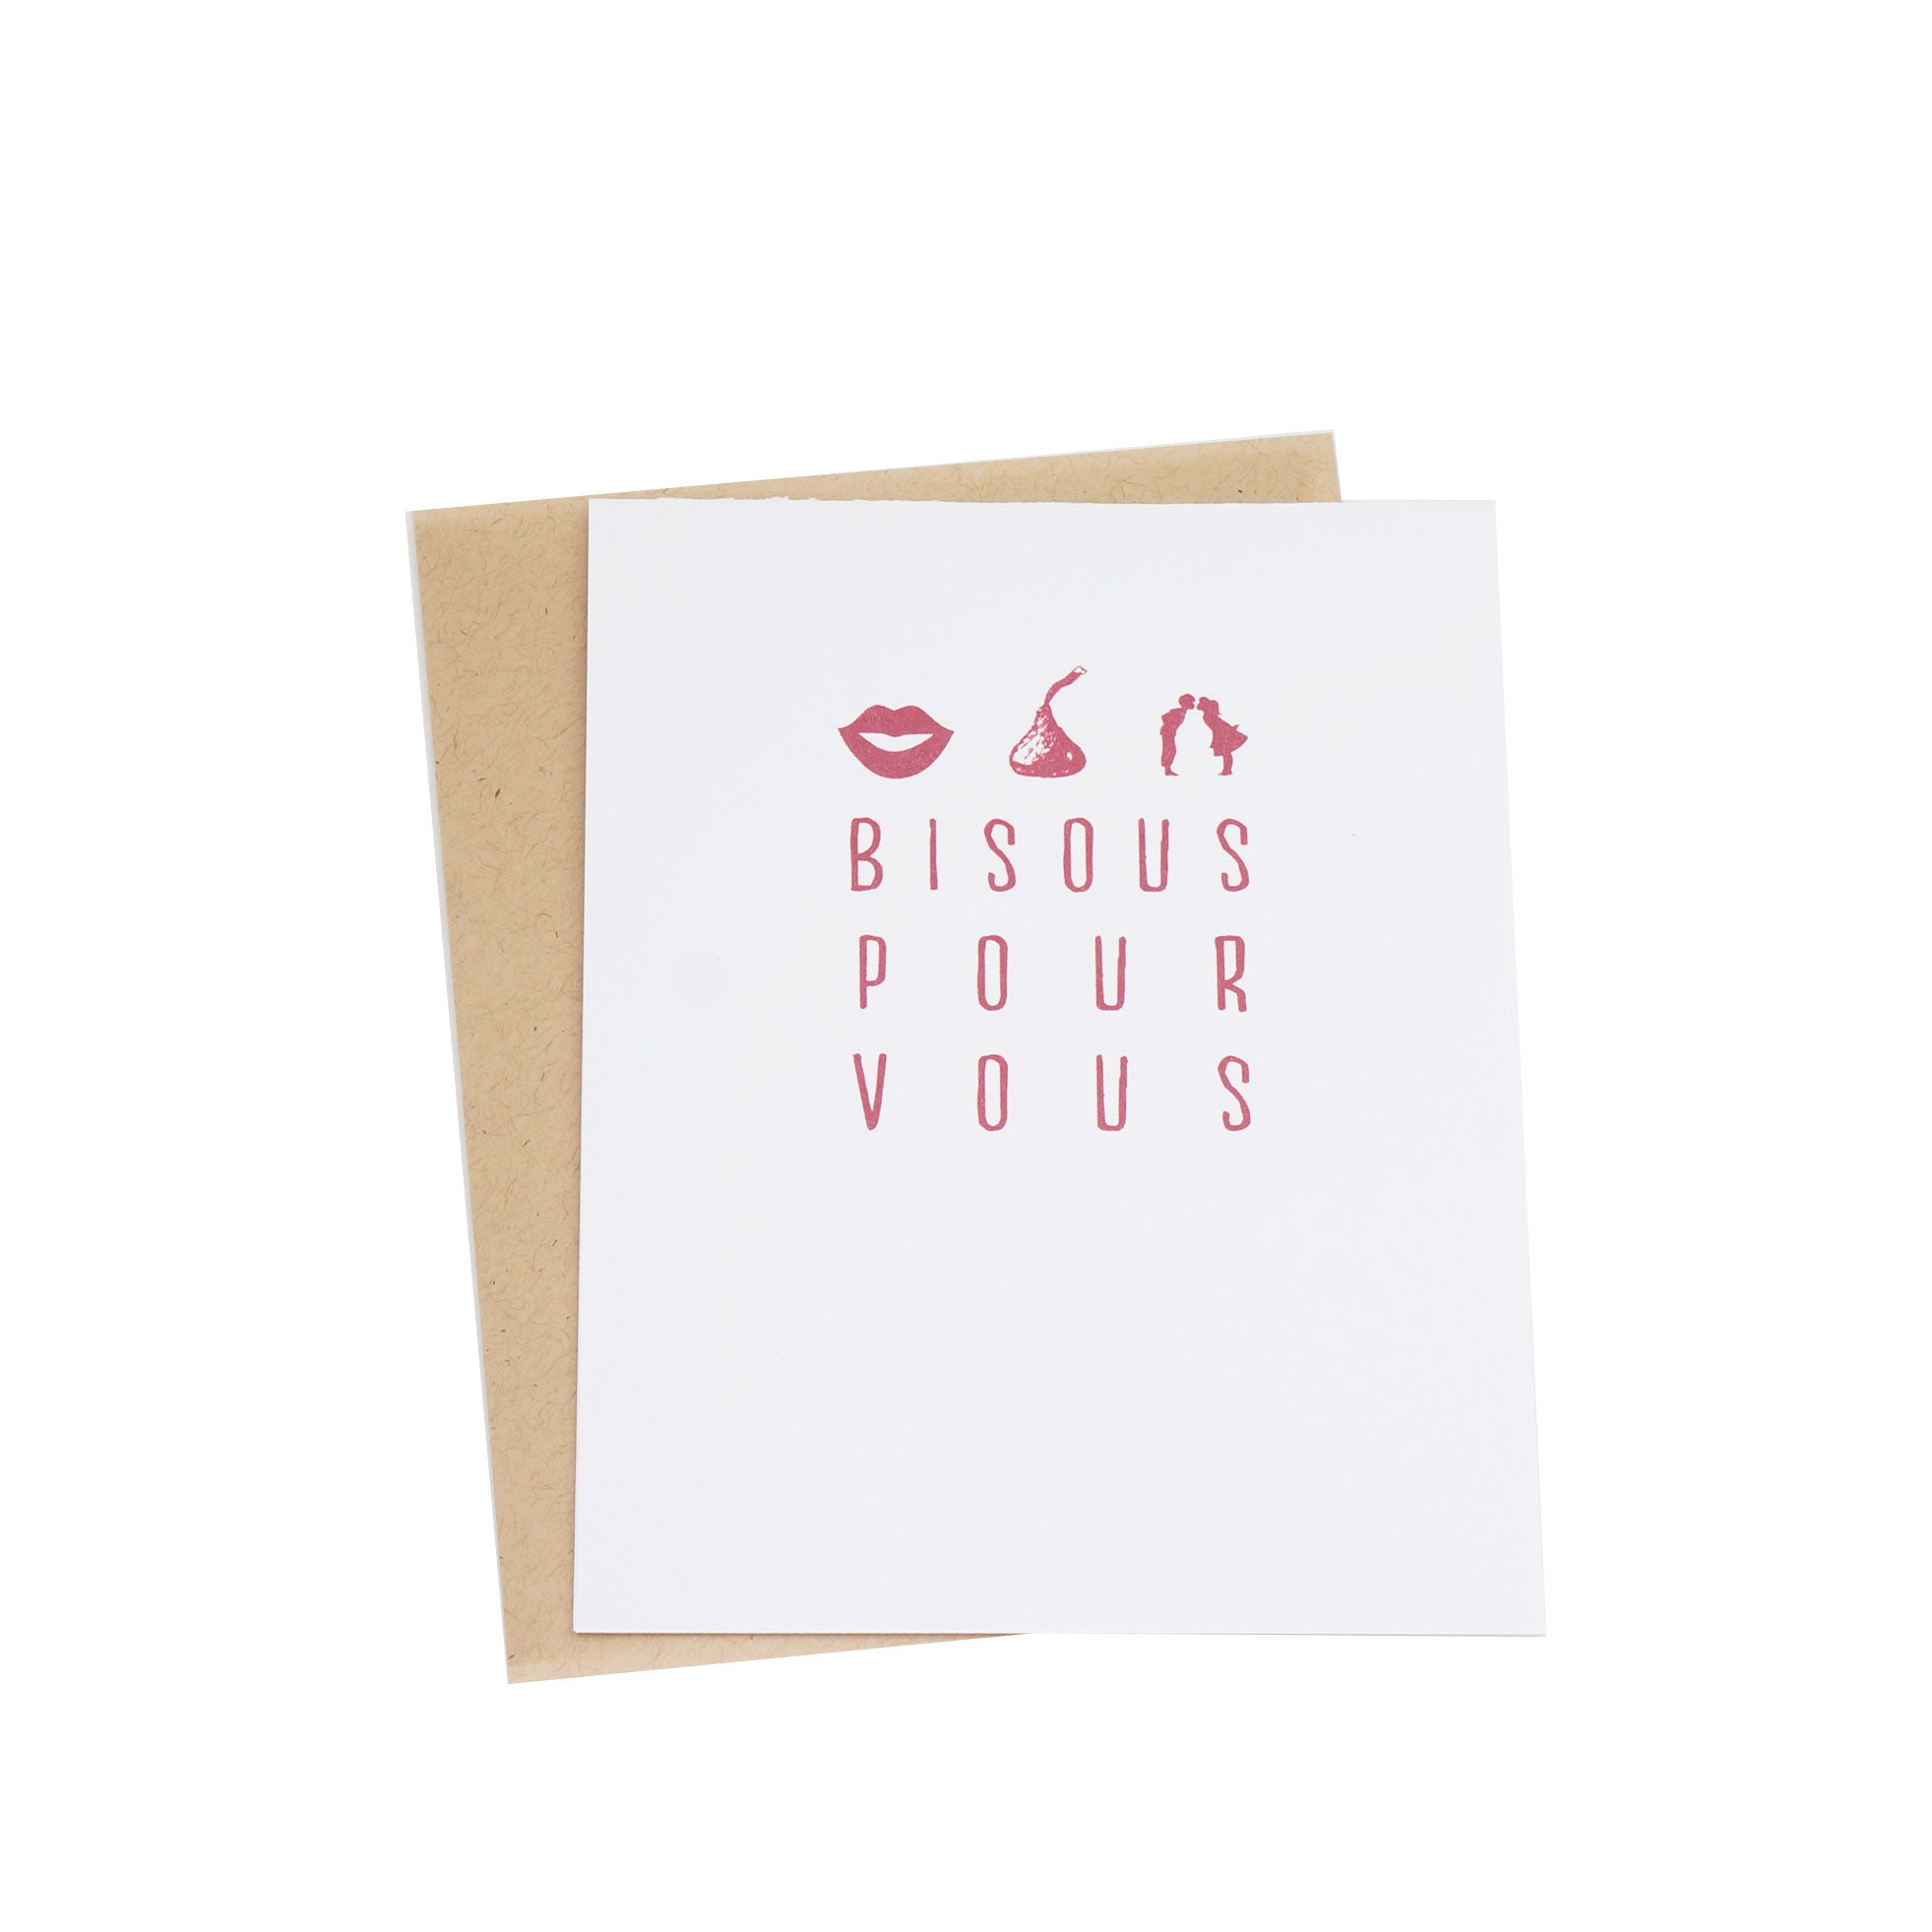 Bisous French Kisses Valentine's Day Card